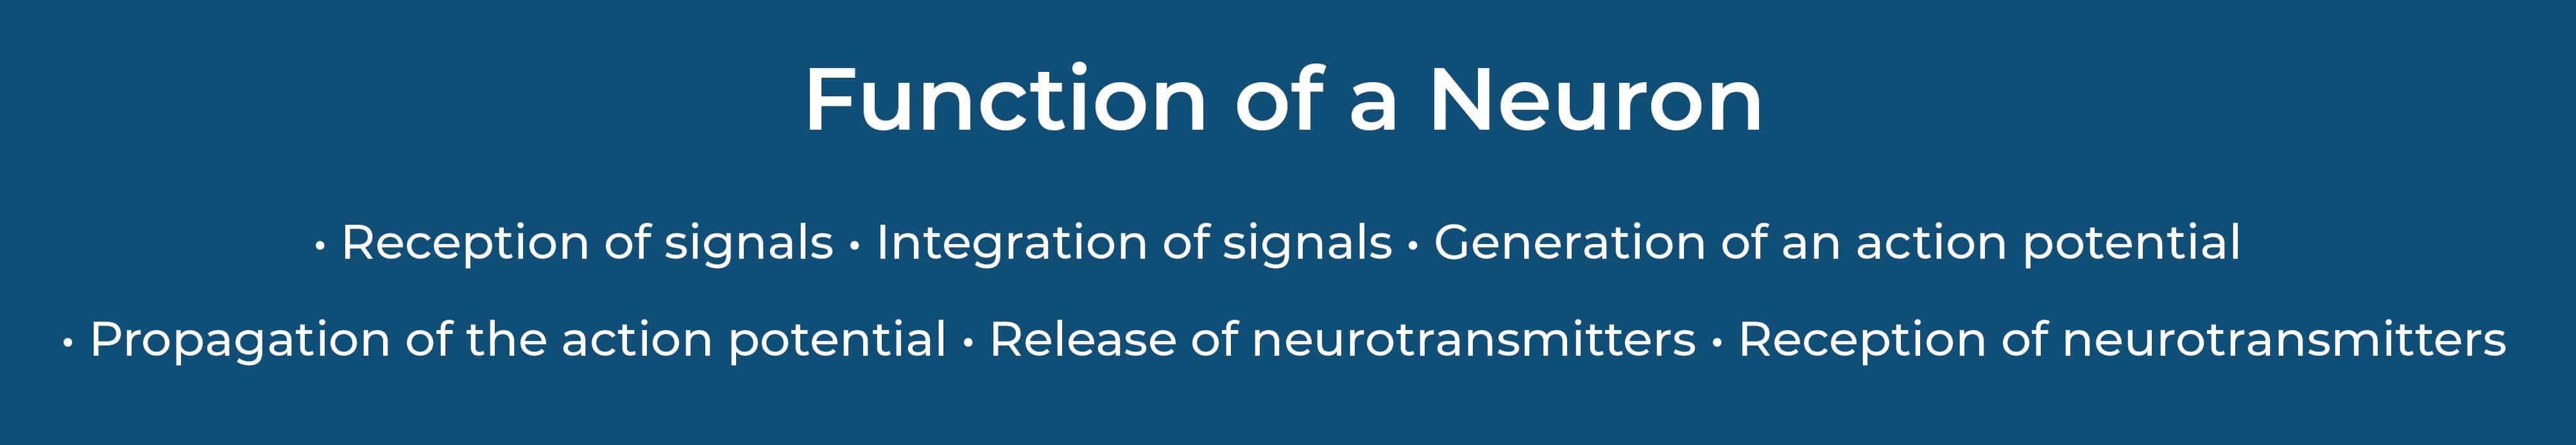 functions of neuron